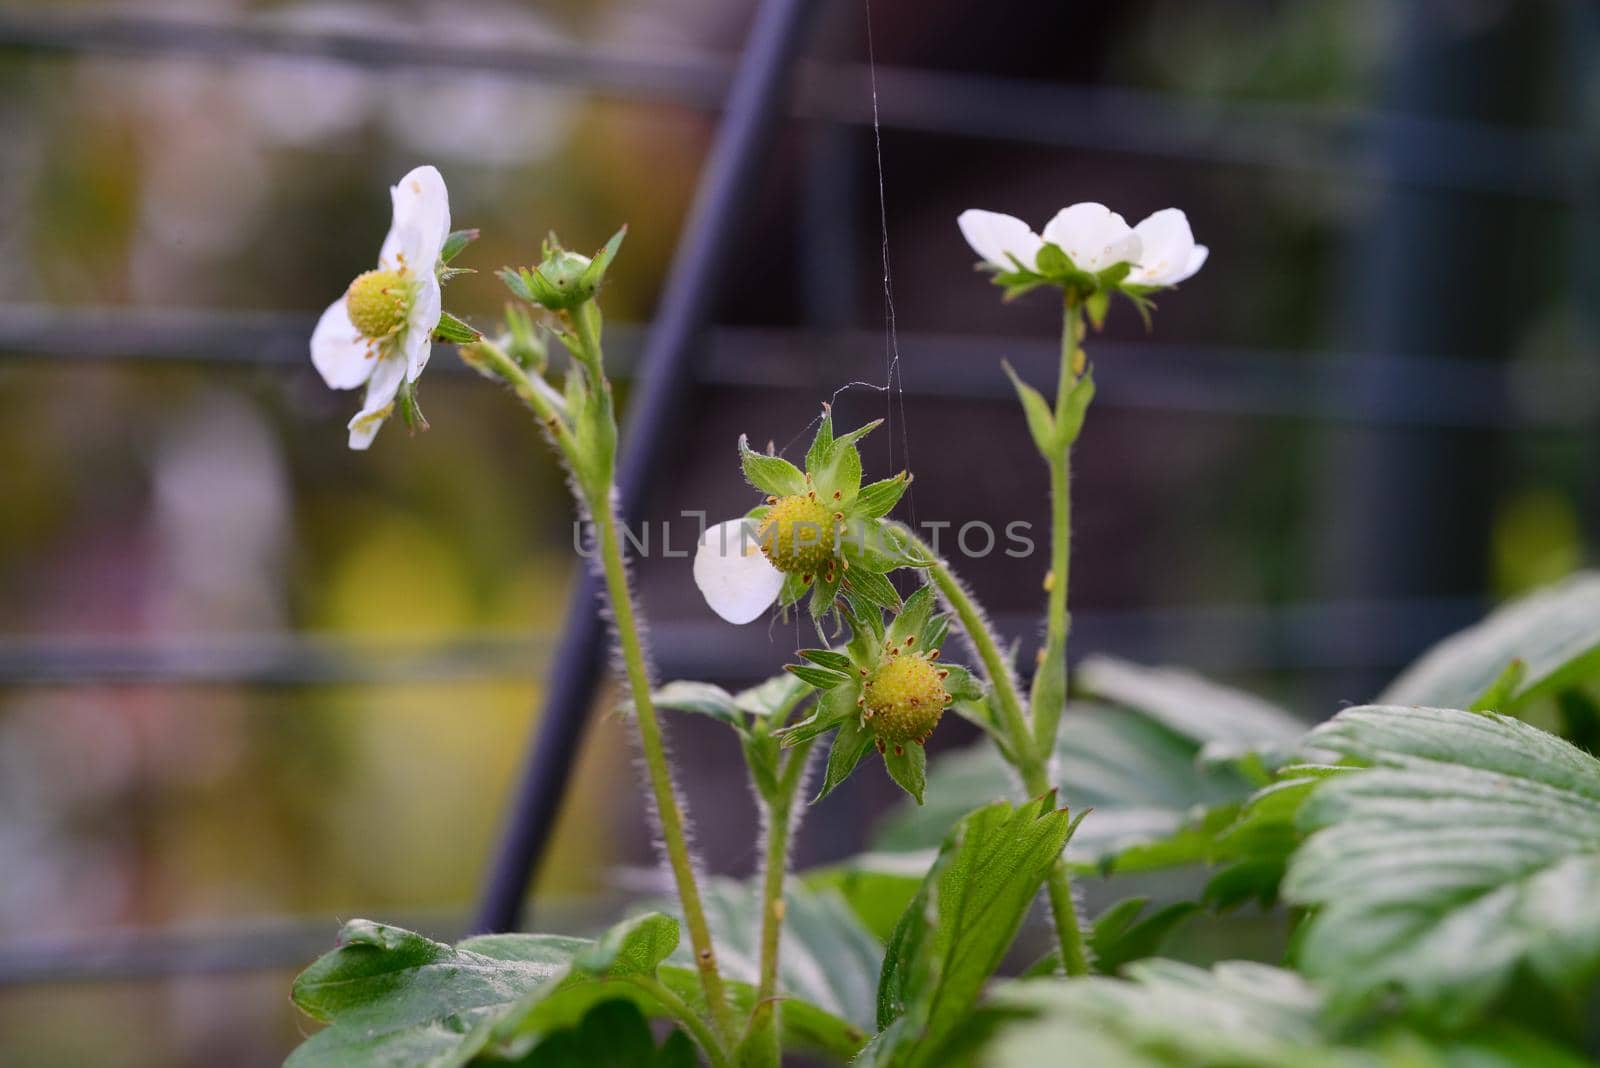 Strawberries turning from blossoms to berries as a close up